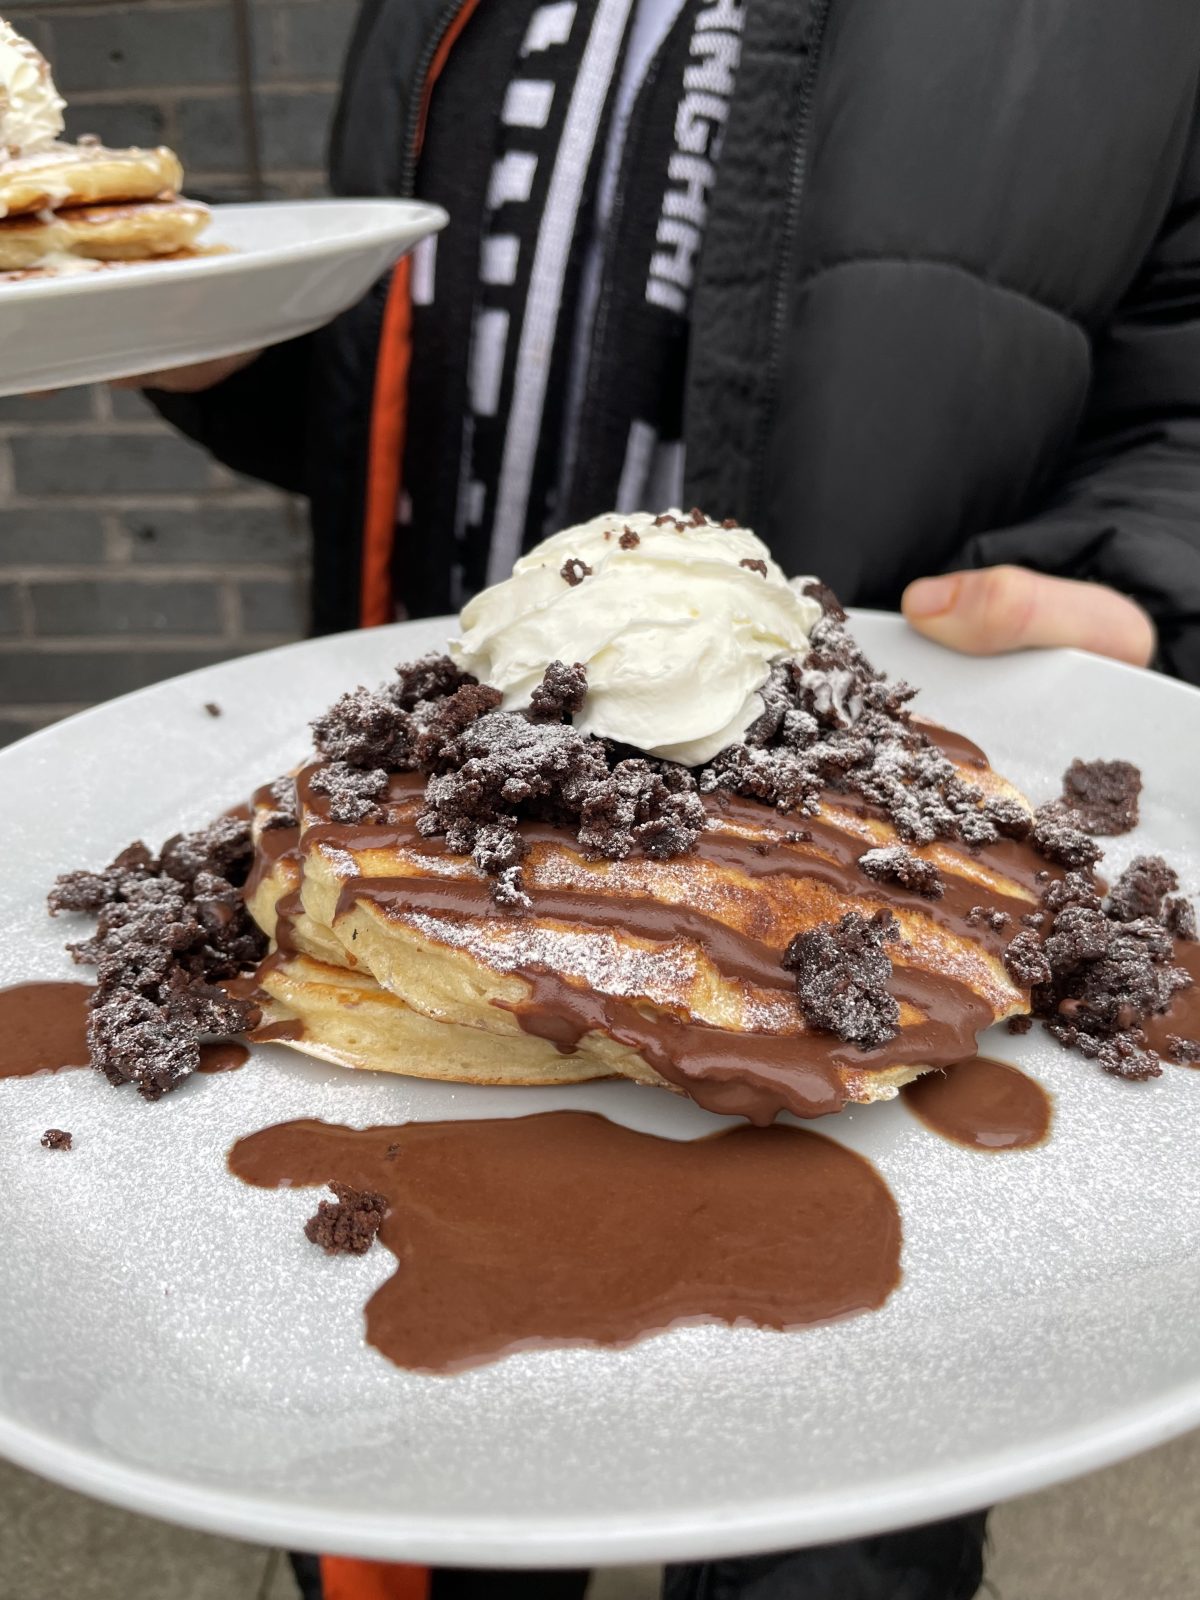 Black Milk reopens with new pancake menu after 2 months of closure, The Manc